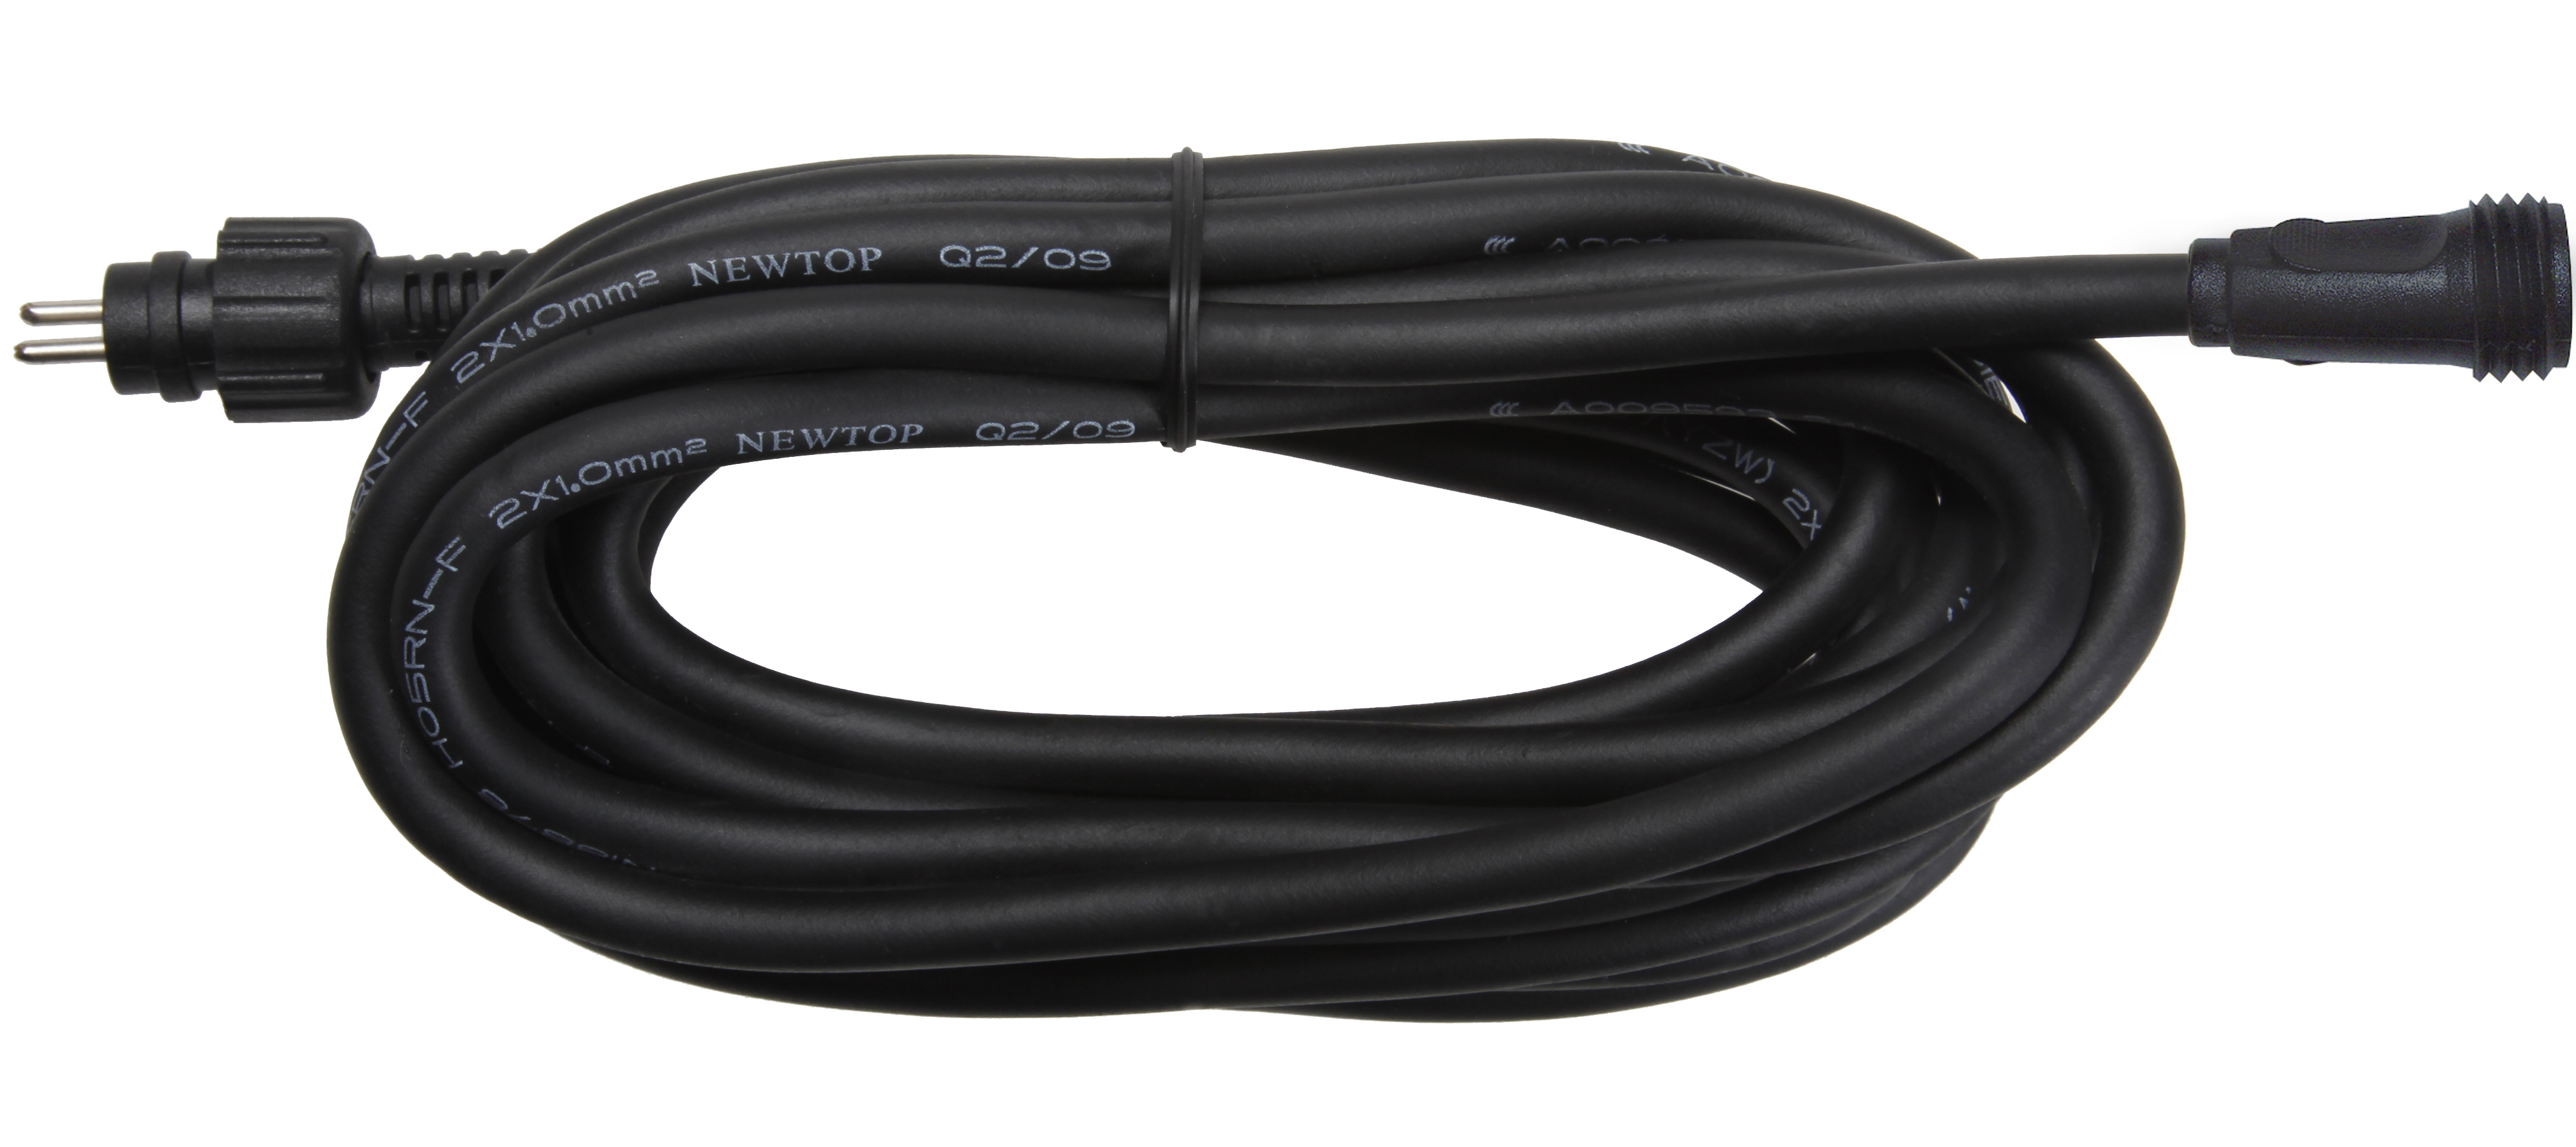 Techmar 12v Rubber extension cable with screw connectors 5m